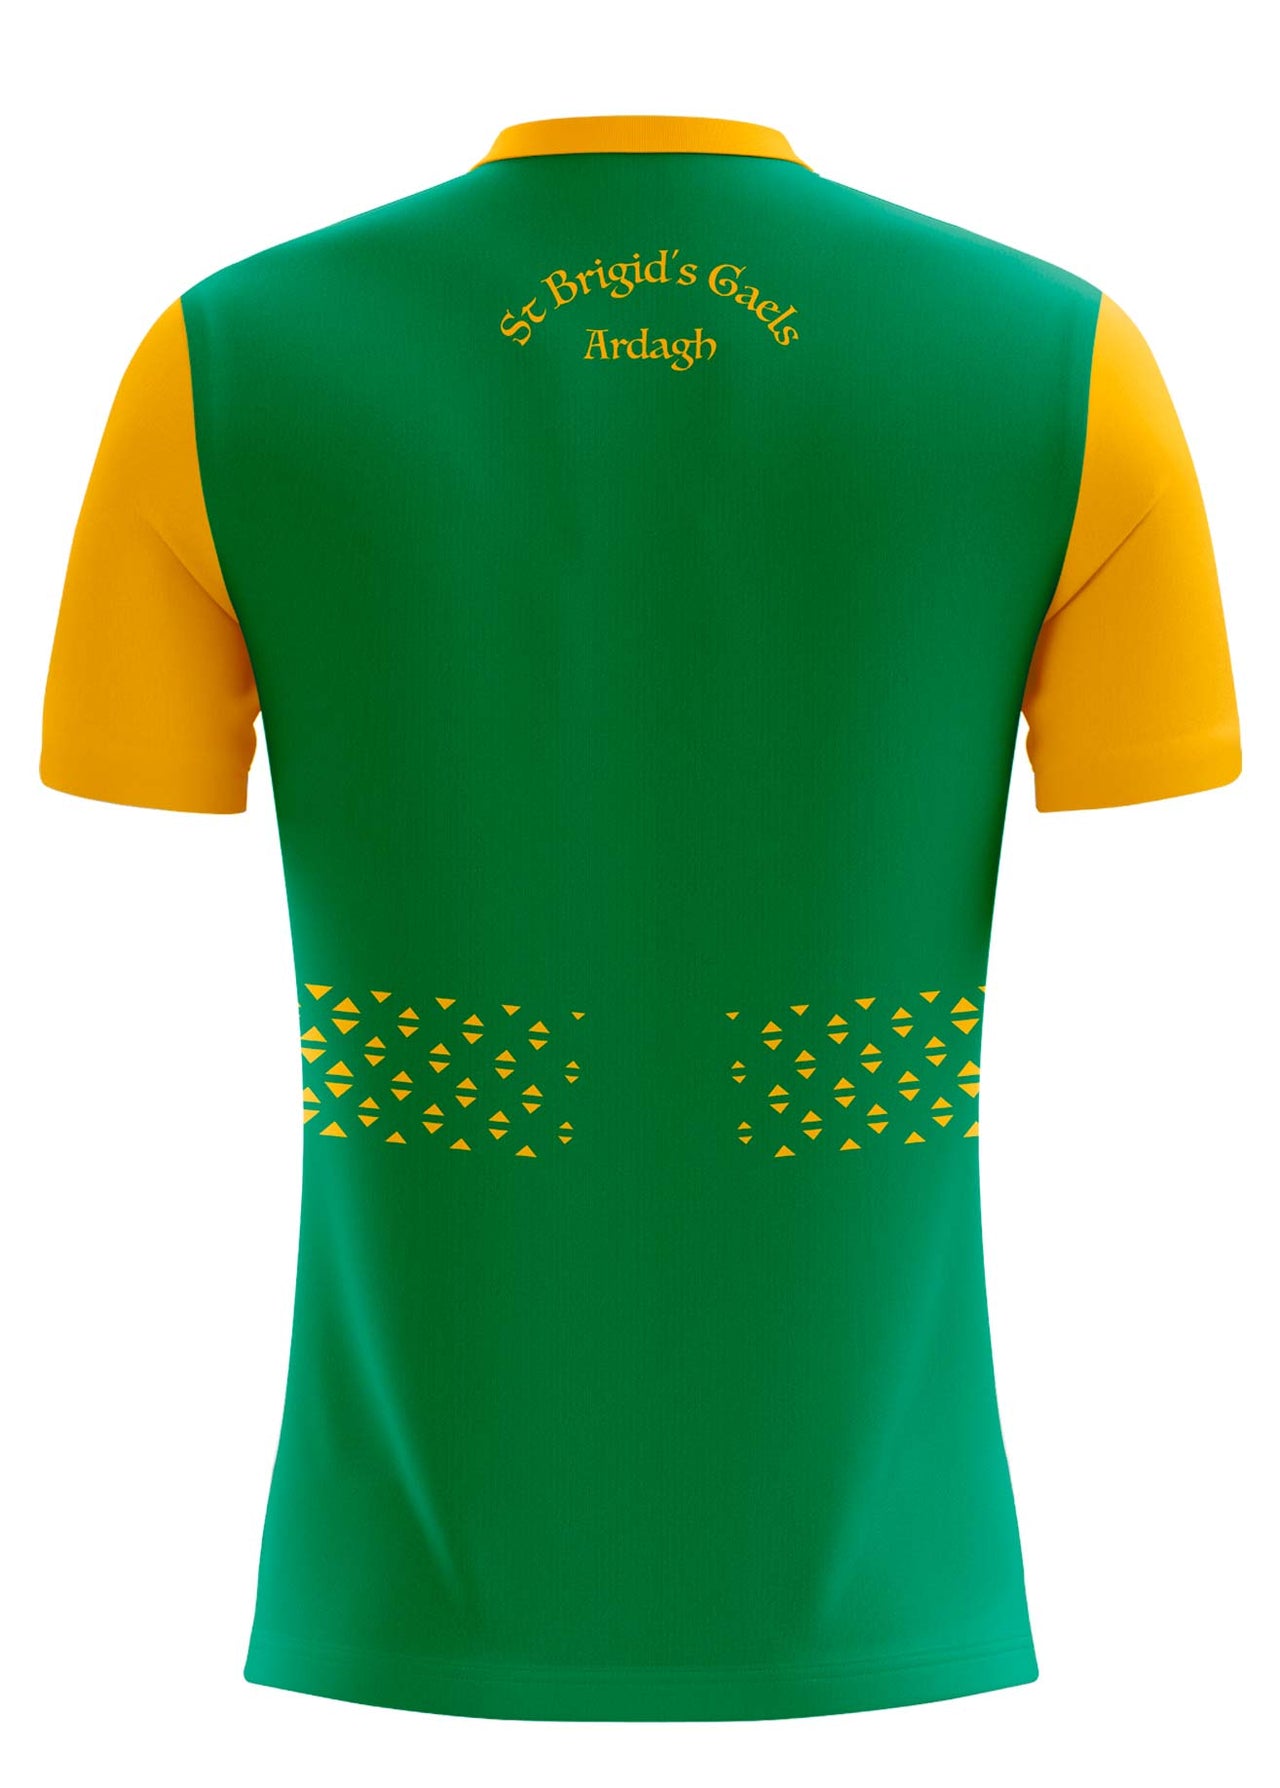 St Brigid's Gaels Ardagh Home Jersey Player Fit Adult